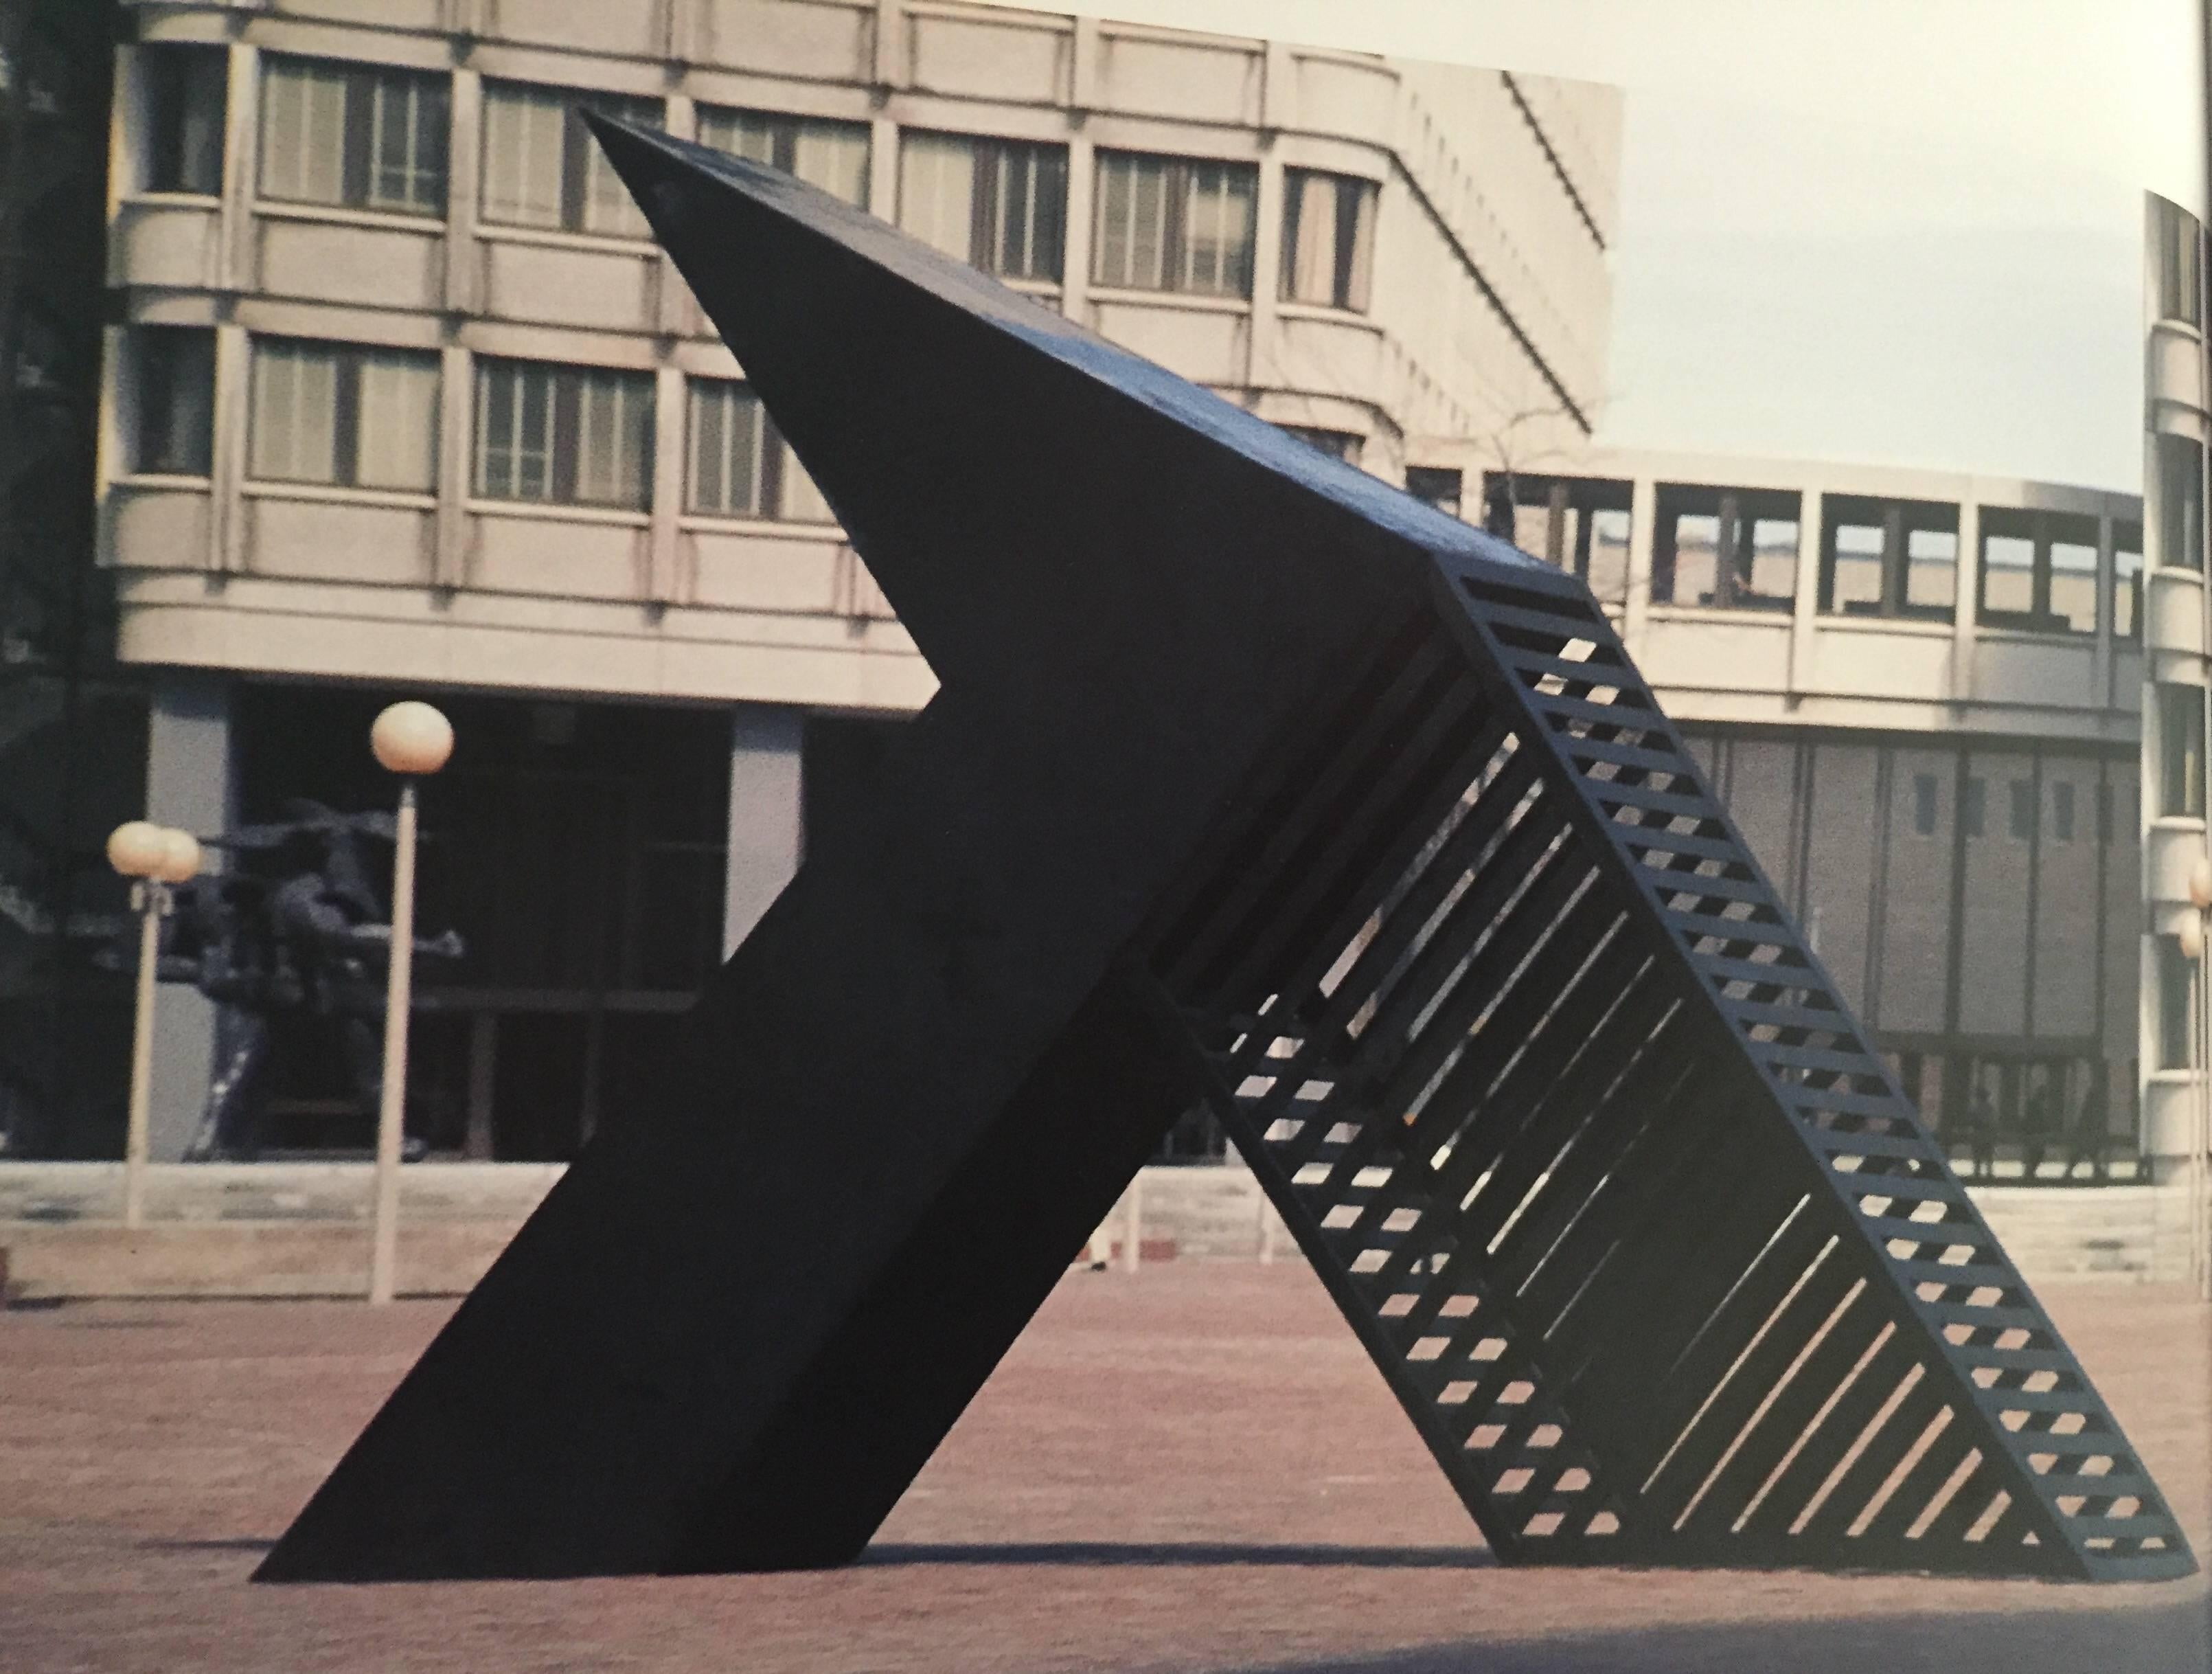 This is John Raimondi's first Sculpture. 
In 1971, at the age of 23, he entered it into a competition and won 1st prize. It went on display for several months at Boston's City Hall Plaza, as exhibited in image number 2.
It was so well received by